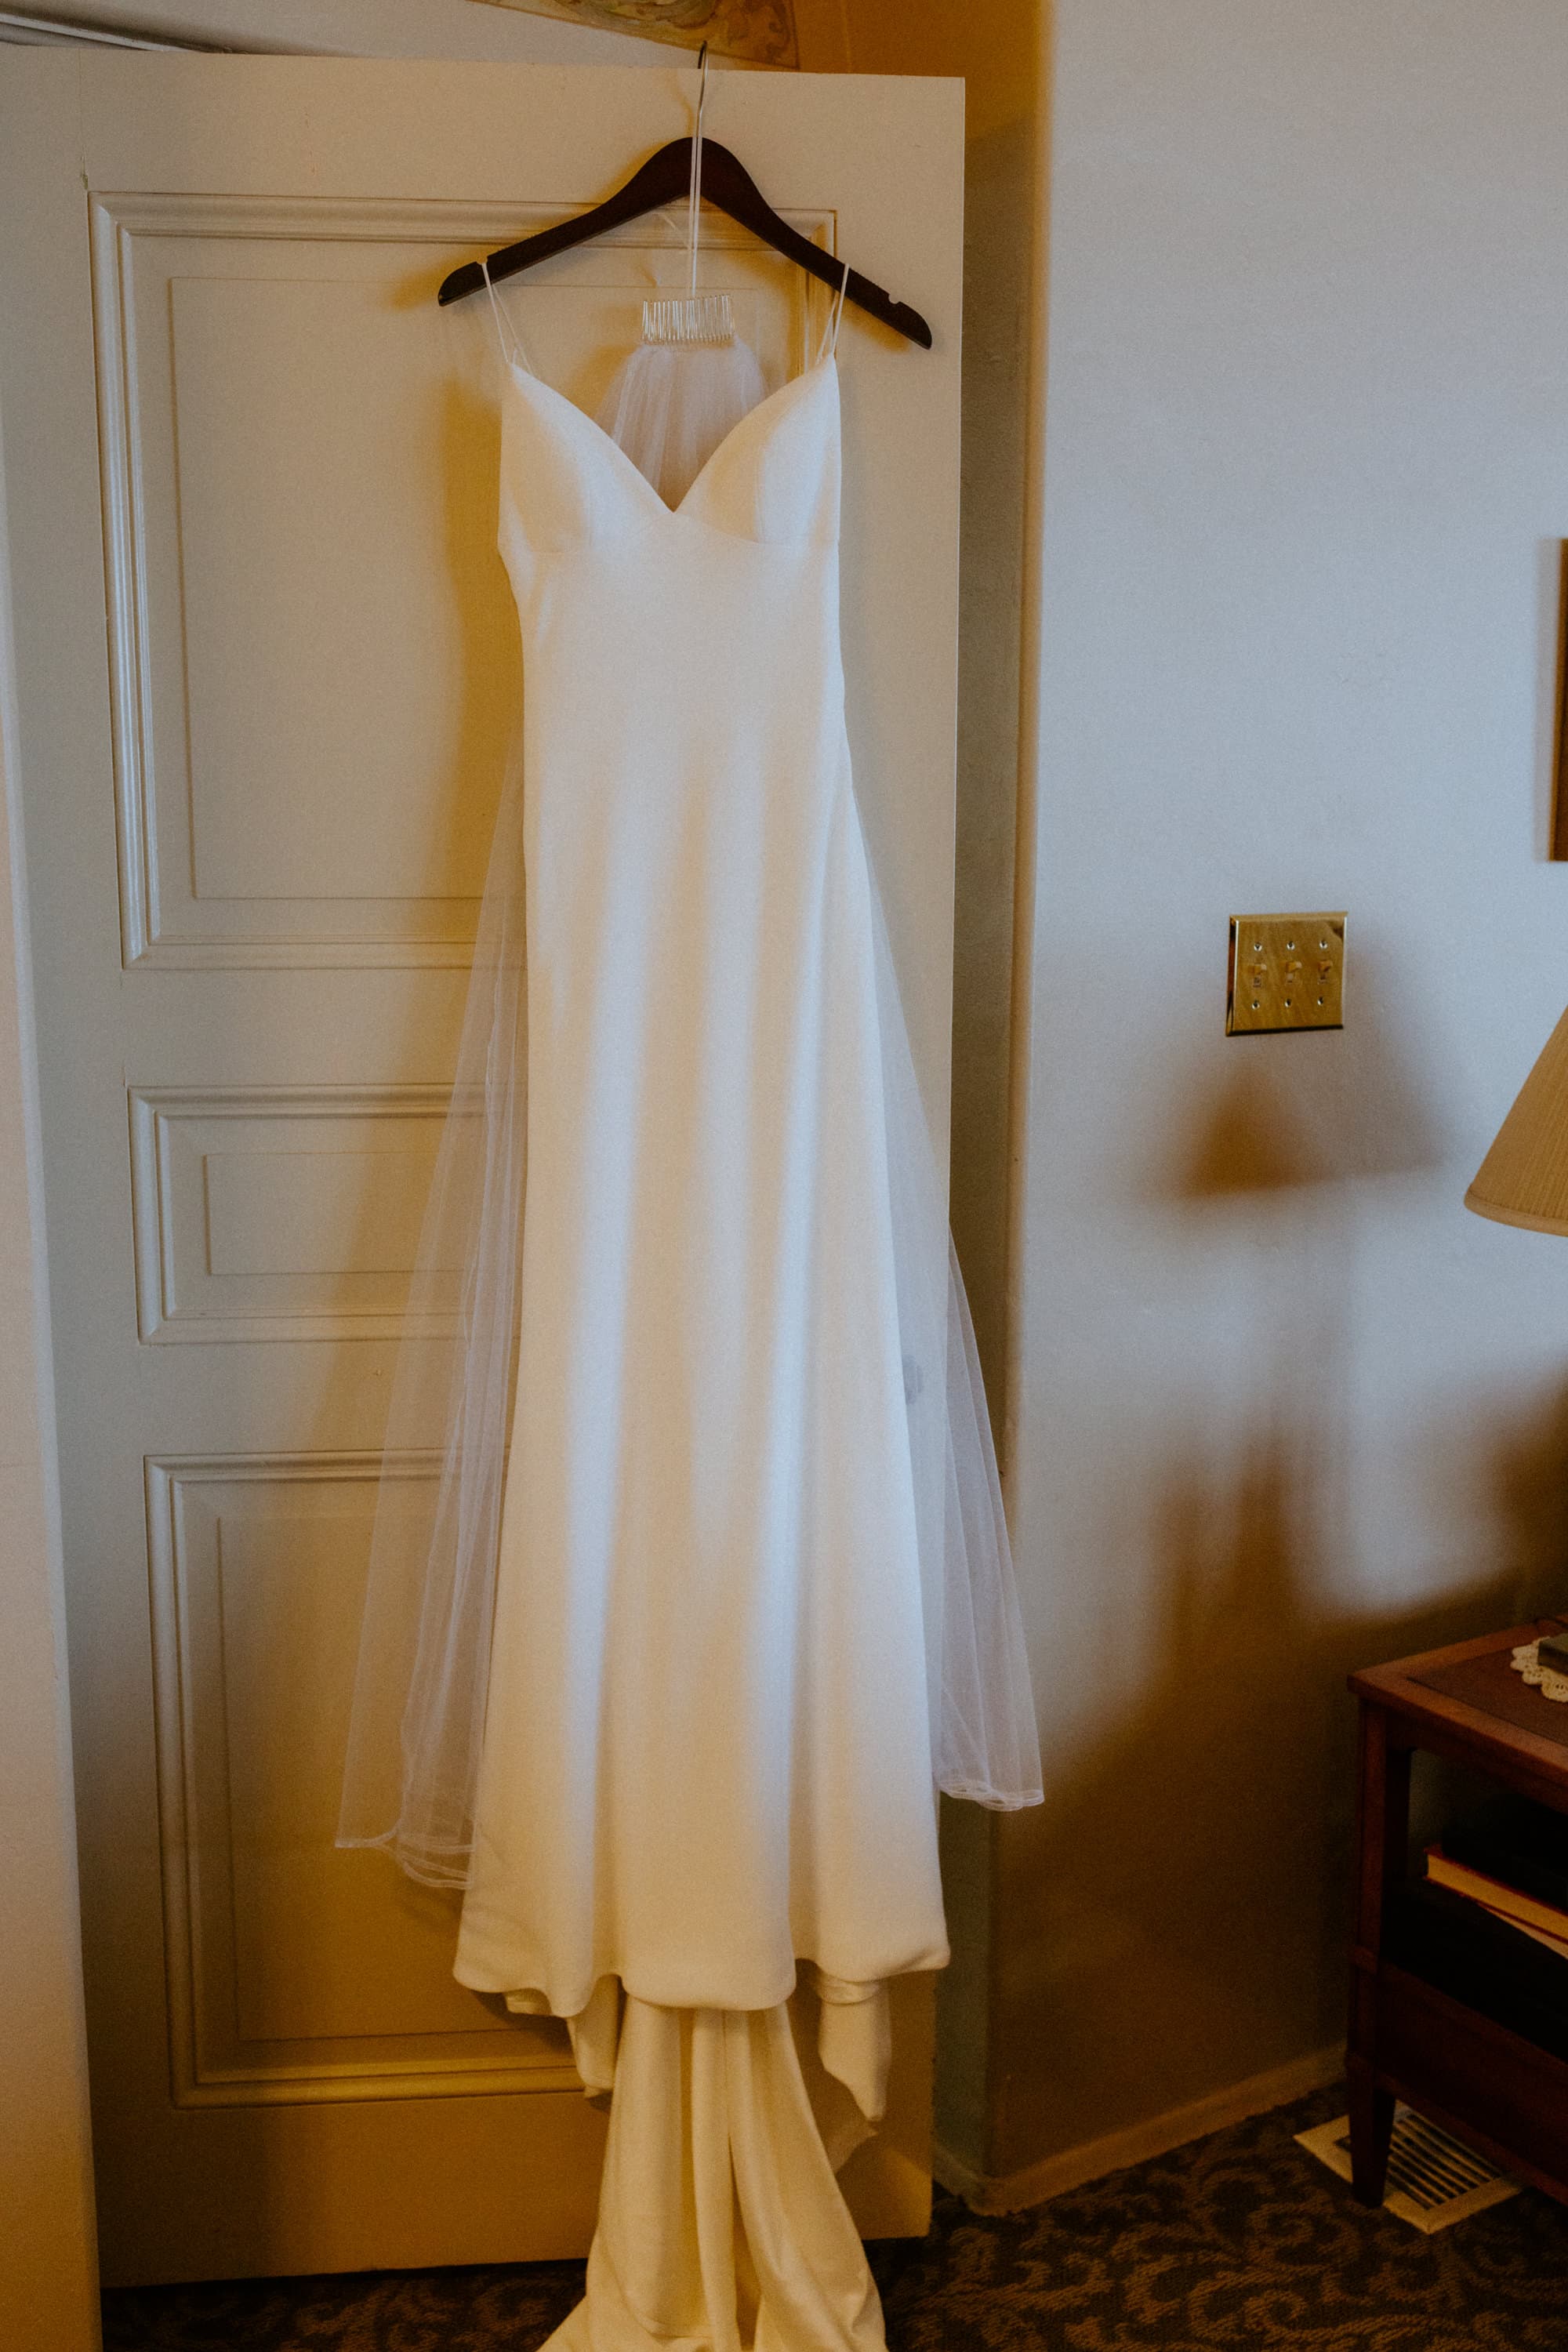 The bride's beautiful wedding gown.